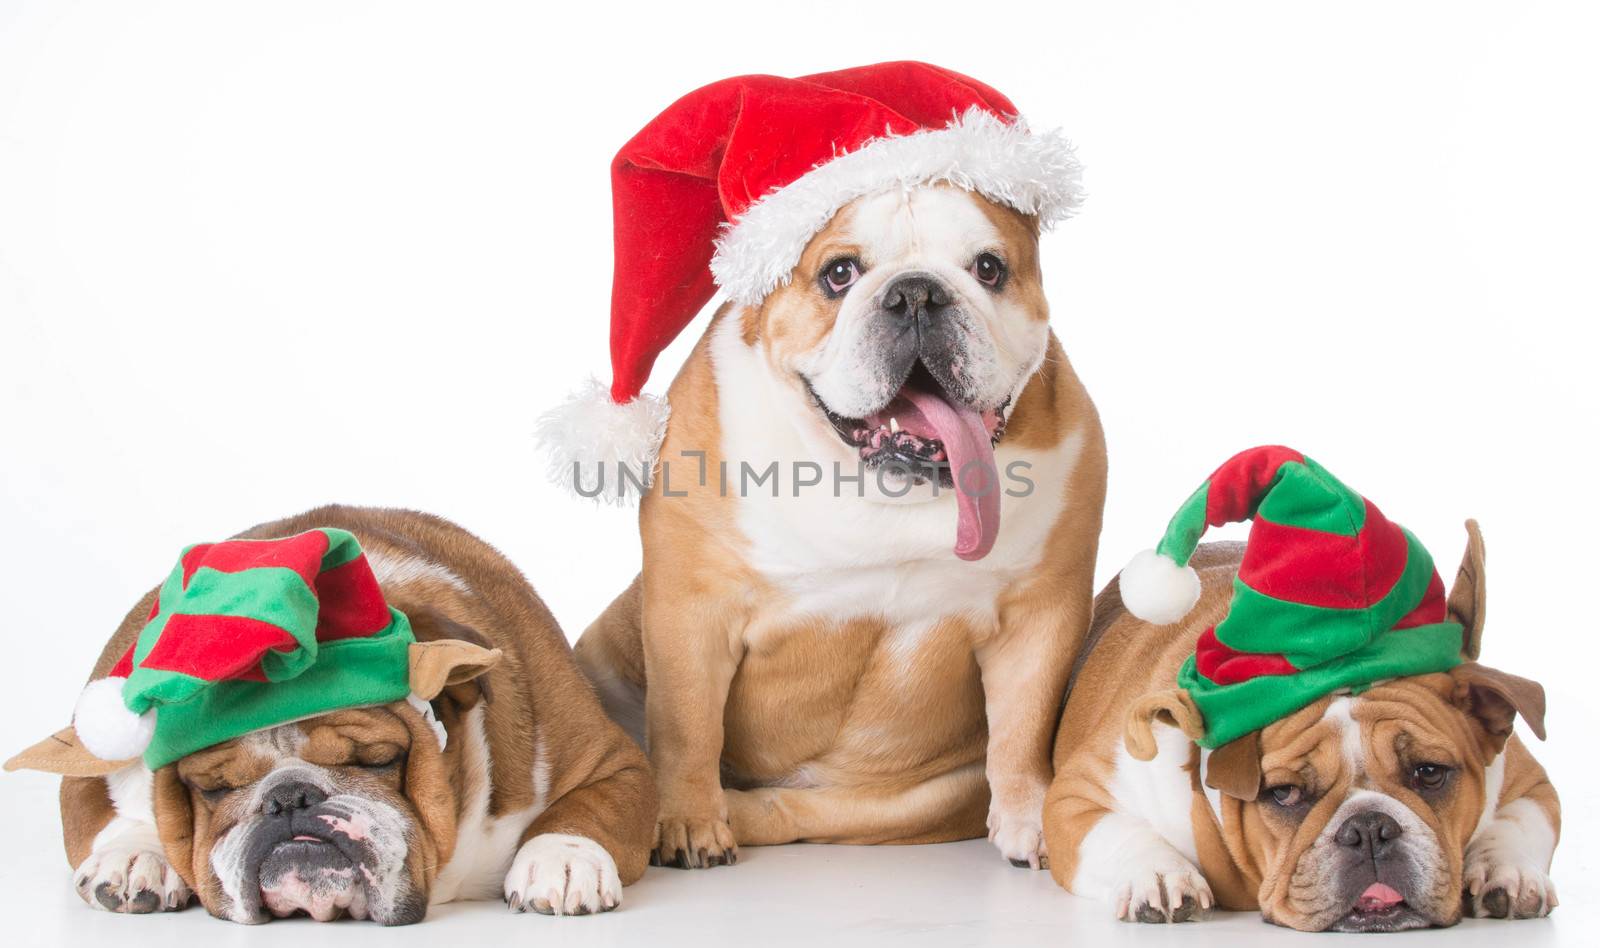 three bulldogs dressed up for christmas on white background